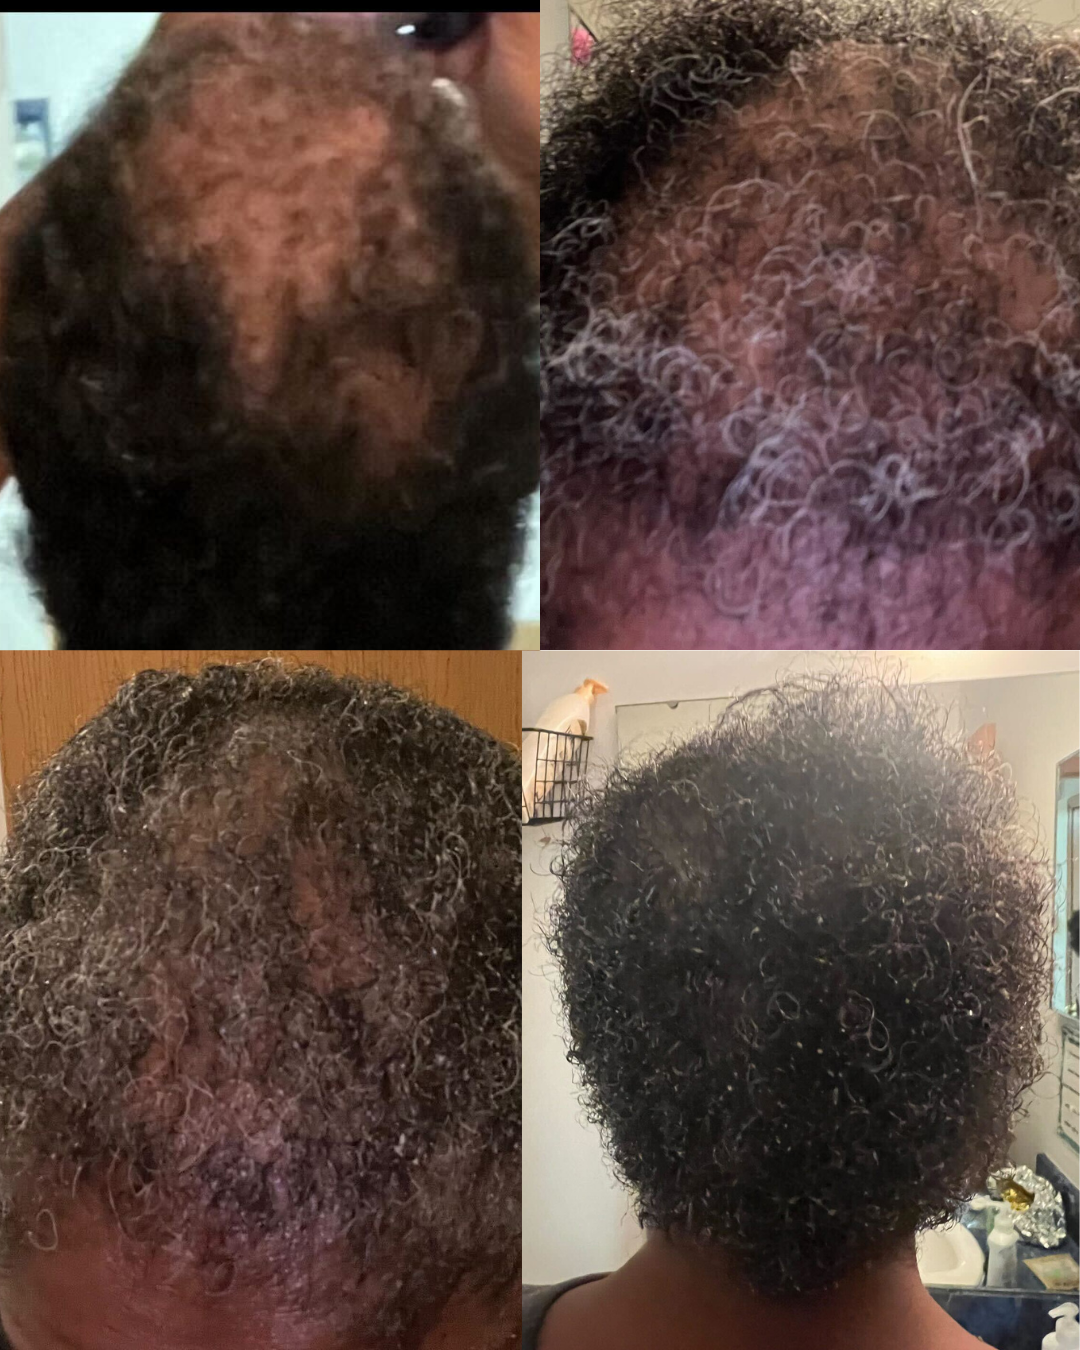 Alopecia Leave-In Hair Growth Tonic